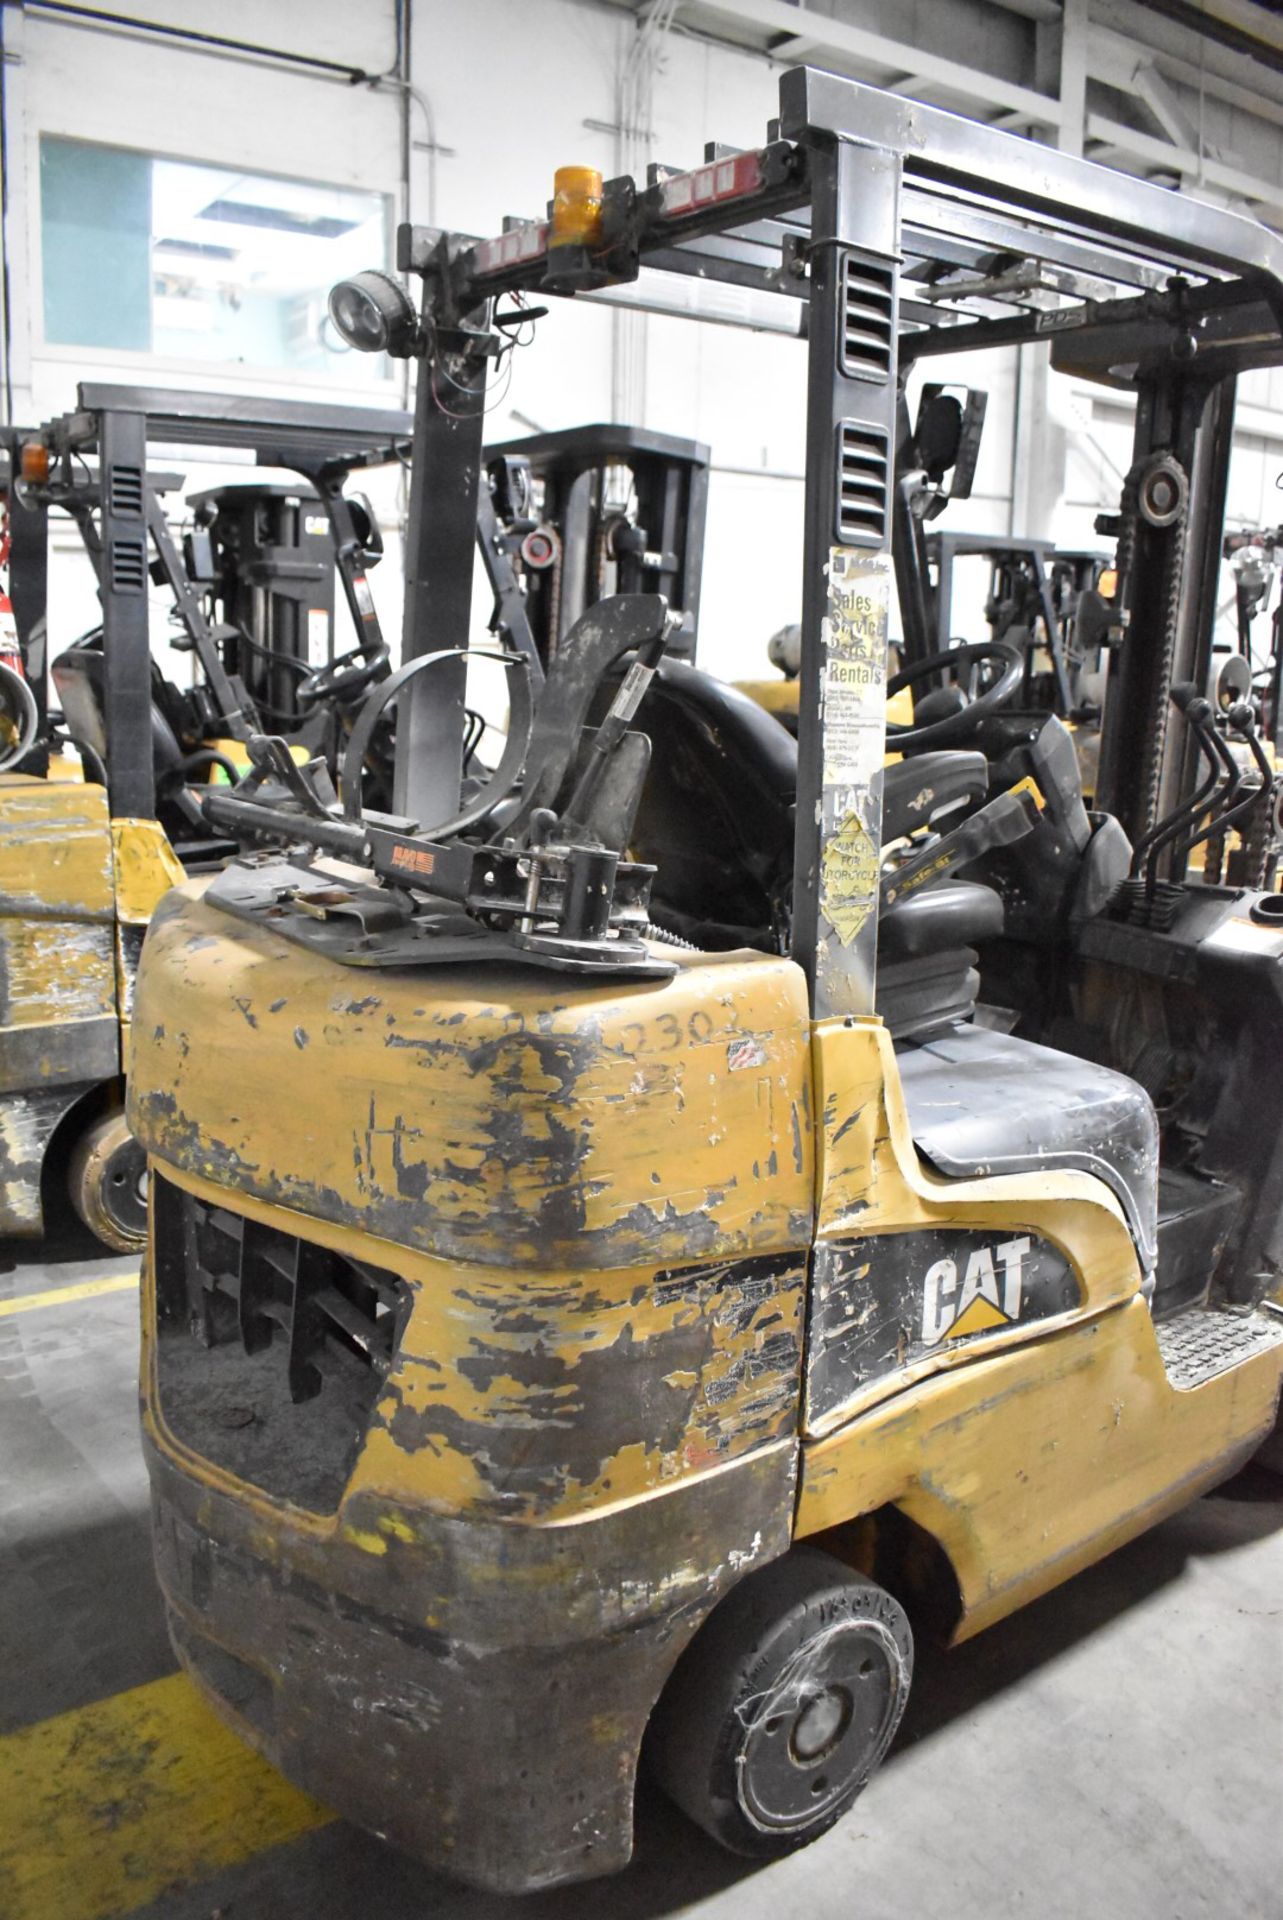 CATERPILLAR 2C6000 5,750 LBS. CAPACITY LPG FORKLIFT WITH 185" MAX VERTICAL REACH, 3-STAGE HIGH - Image 5 of 9